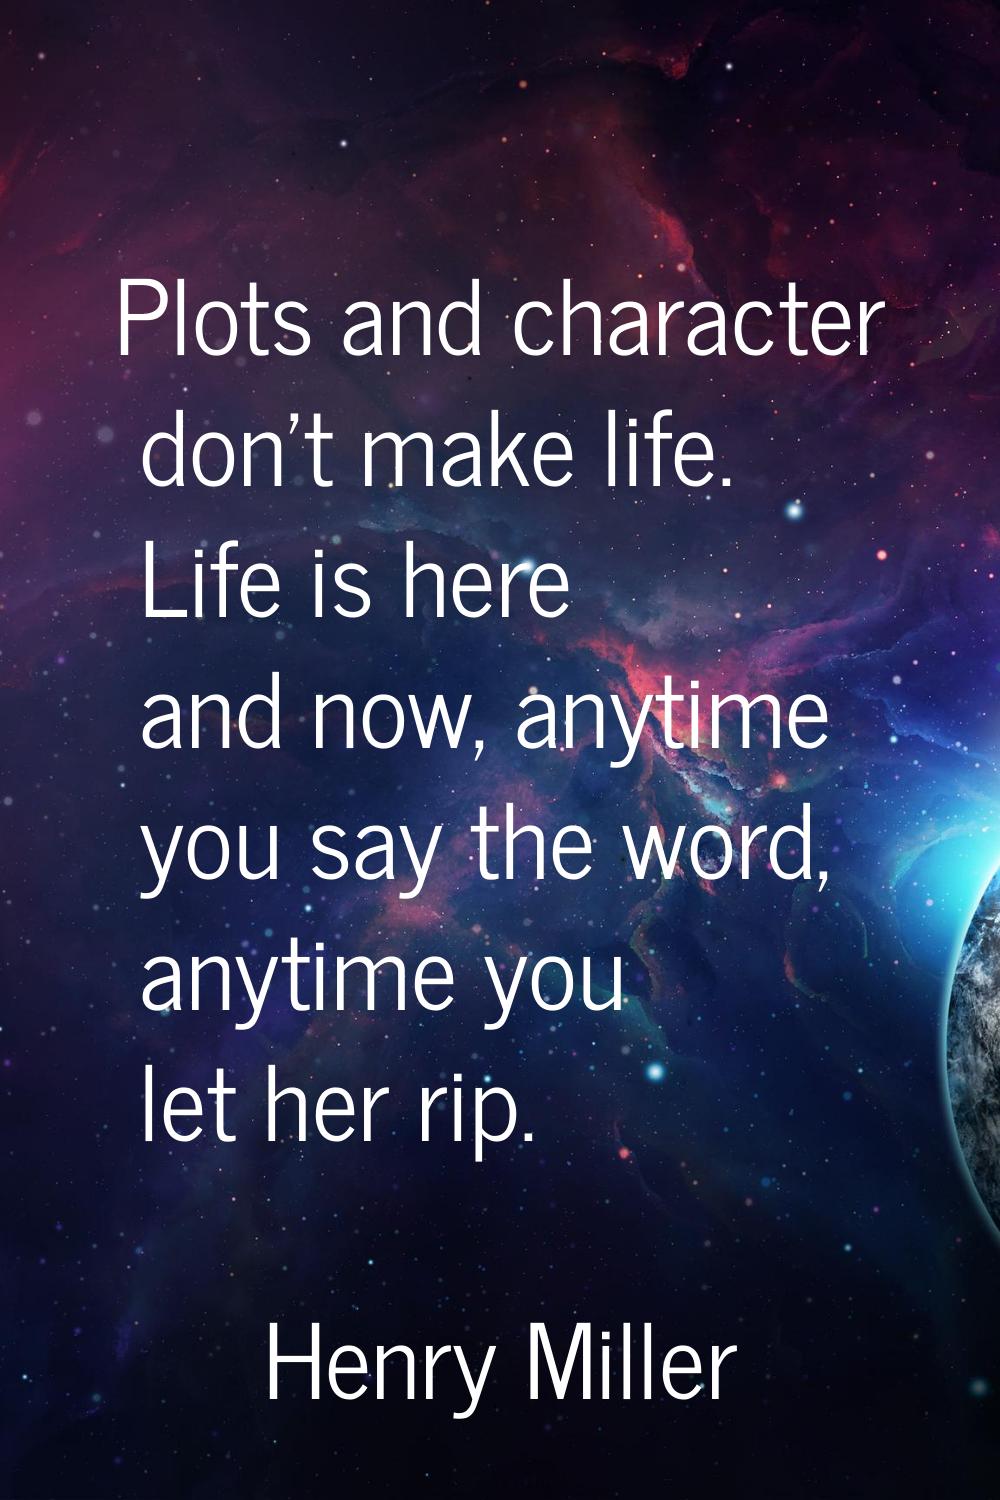 Plots and character don't make life. Life is here and now, anytime you say the word, anytime you le